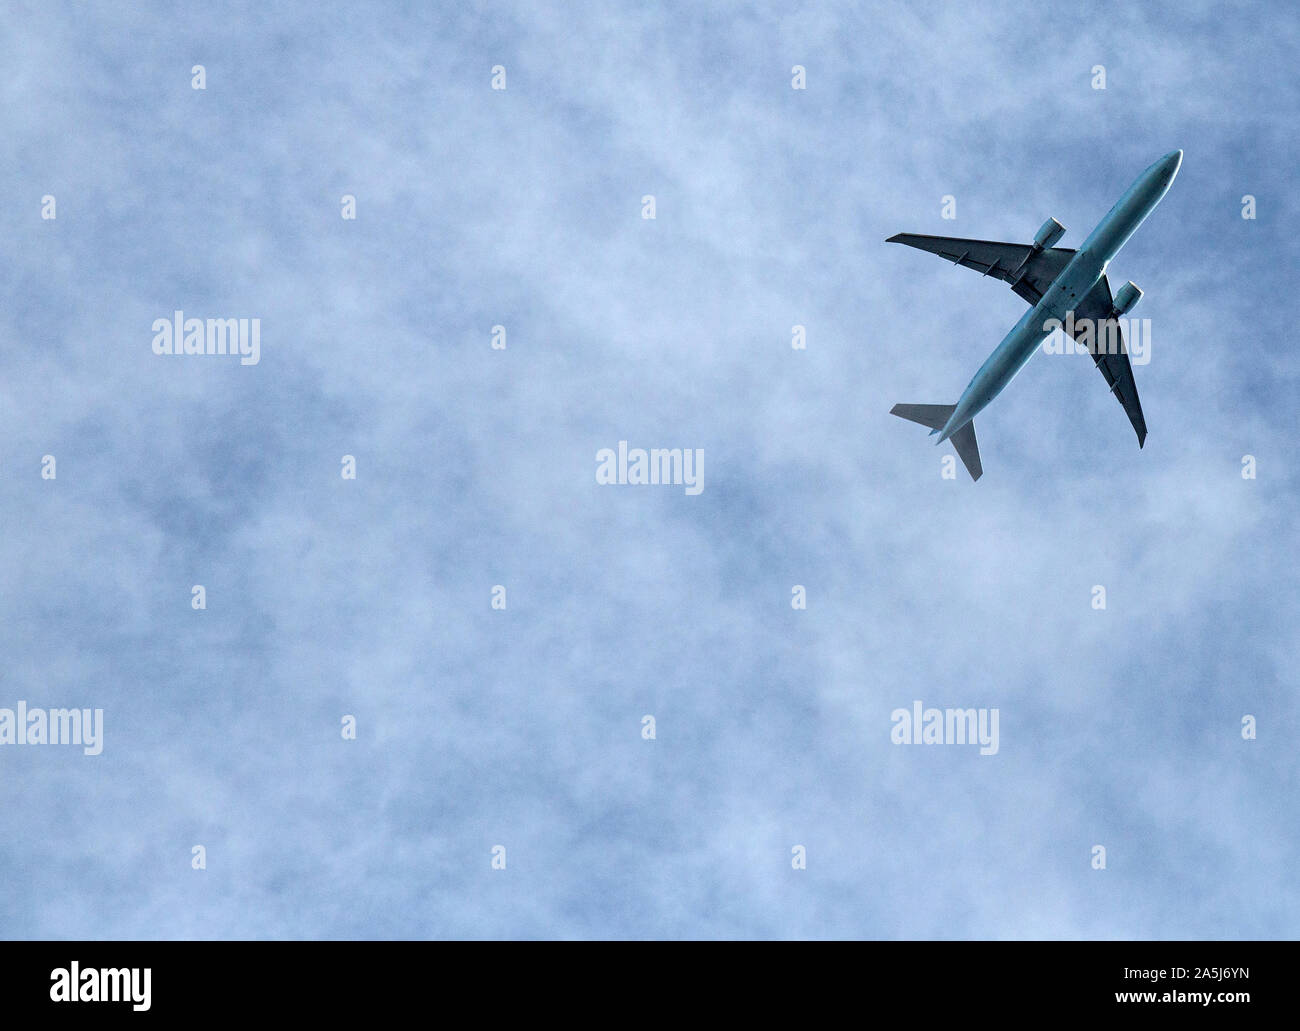 A twin engined jet airliner flying against a patchy blue cloud sky. Stock Photo